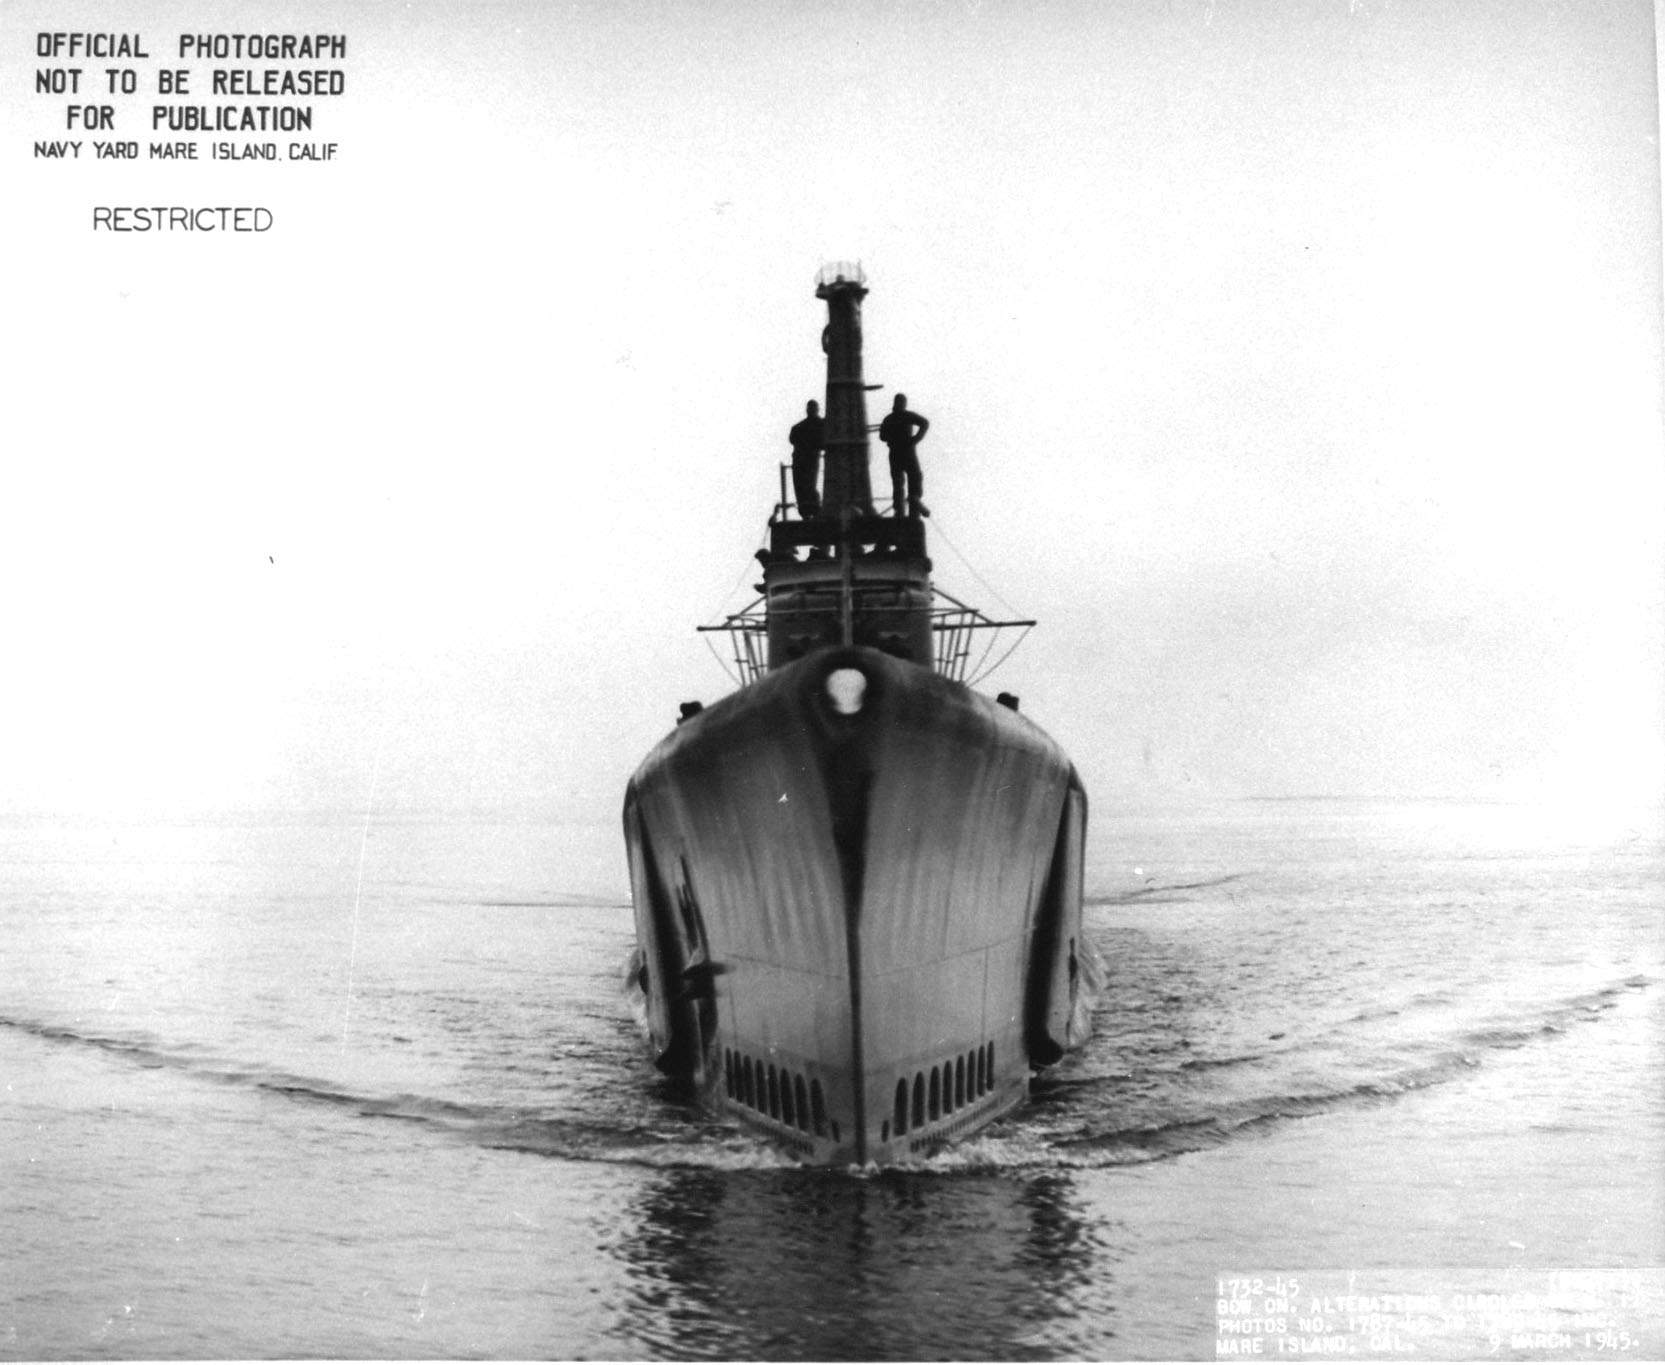 Bow view of USS Ray, Mare Island Naval Shipyard, Vallejo, California, United States, 9 Mar 1945